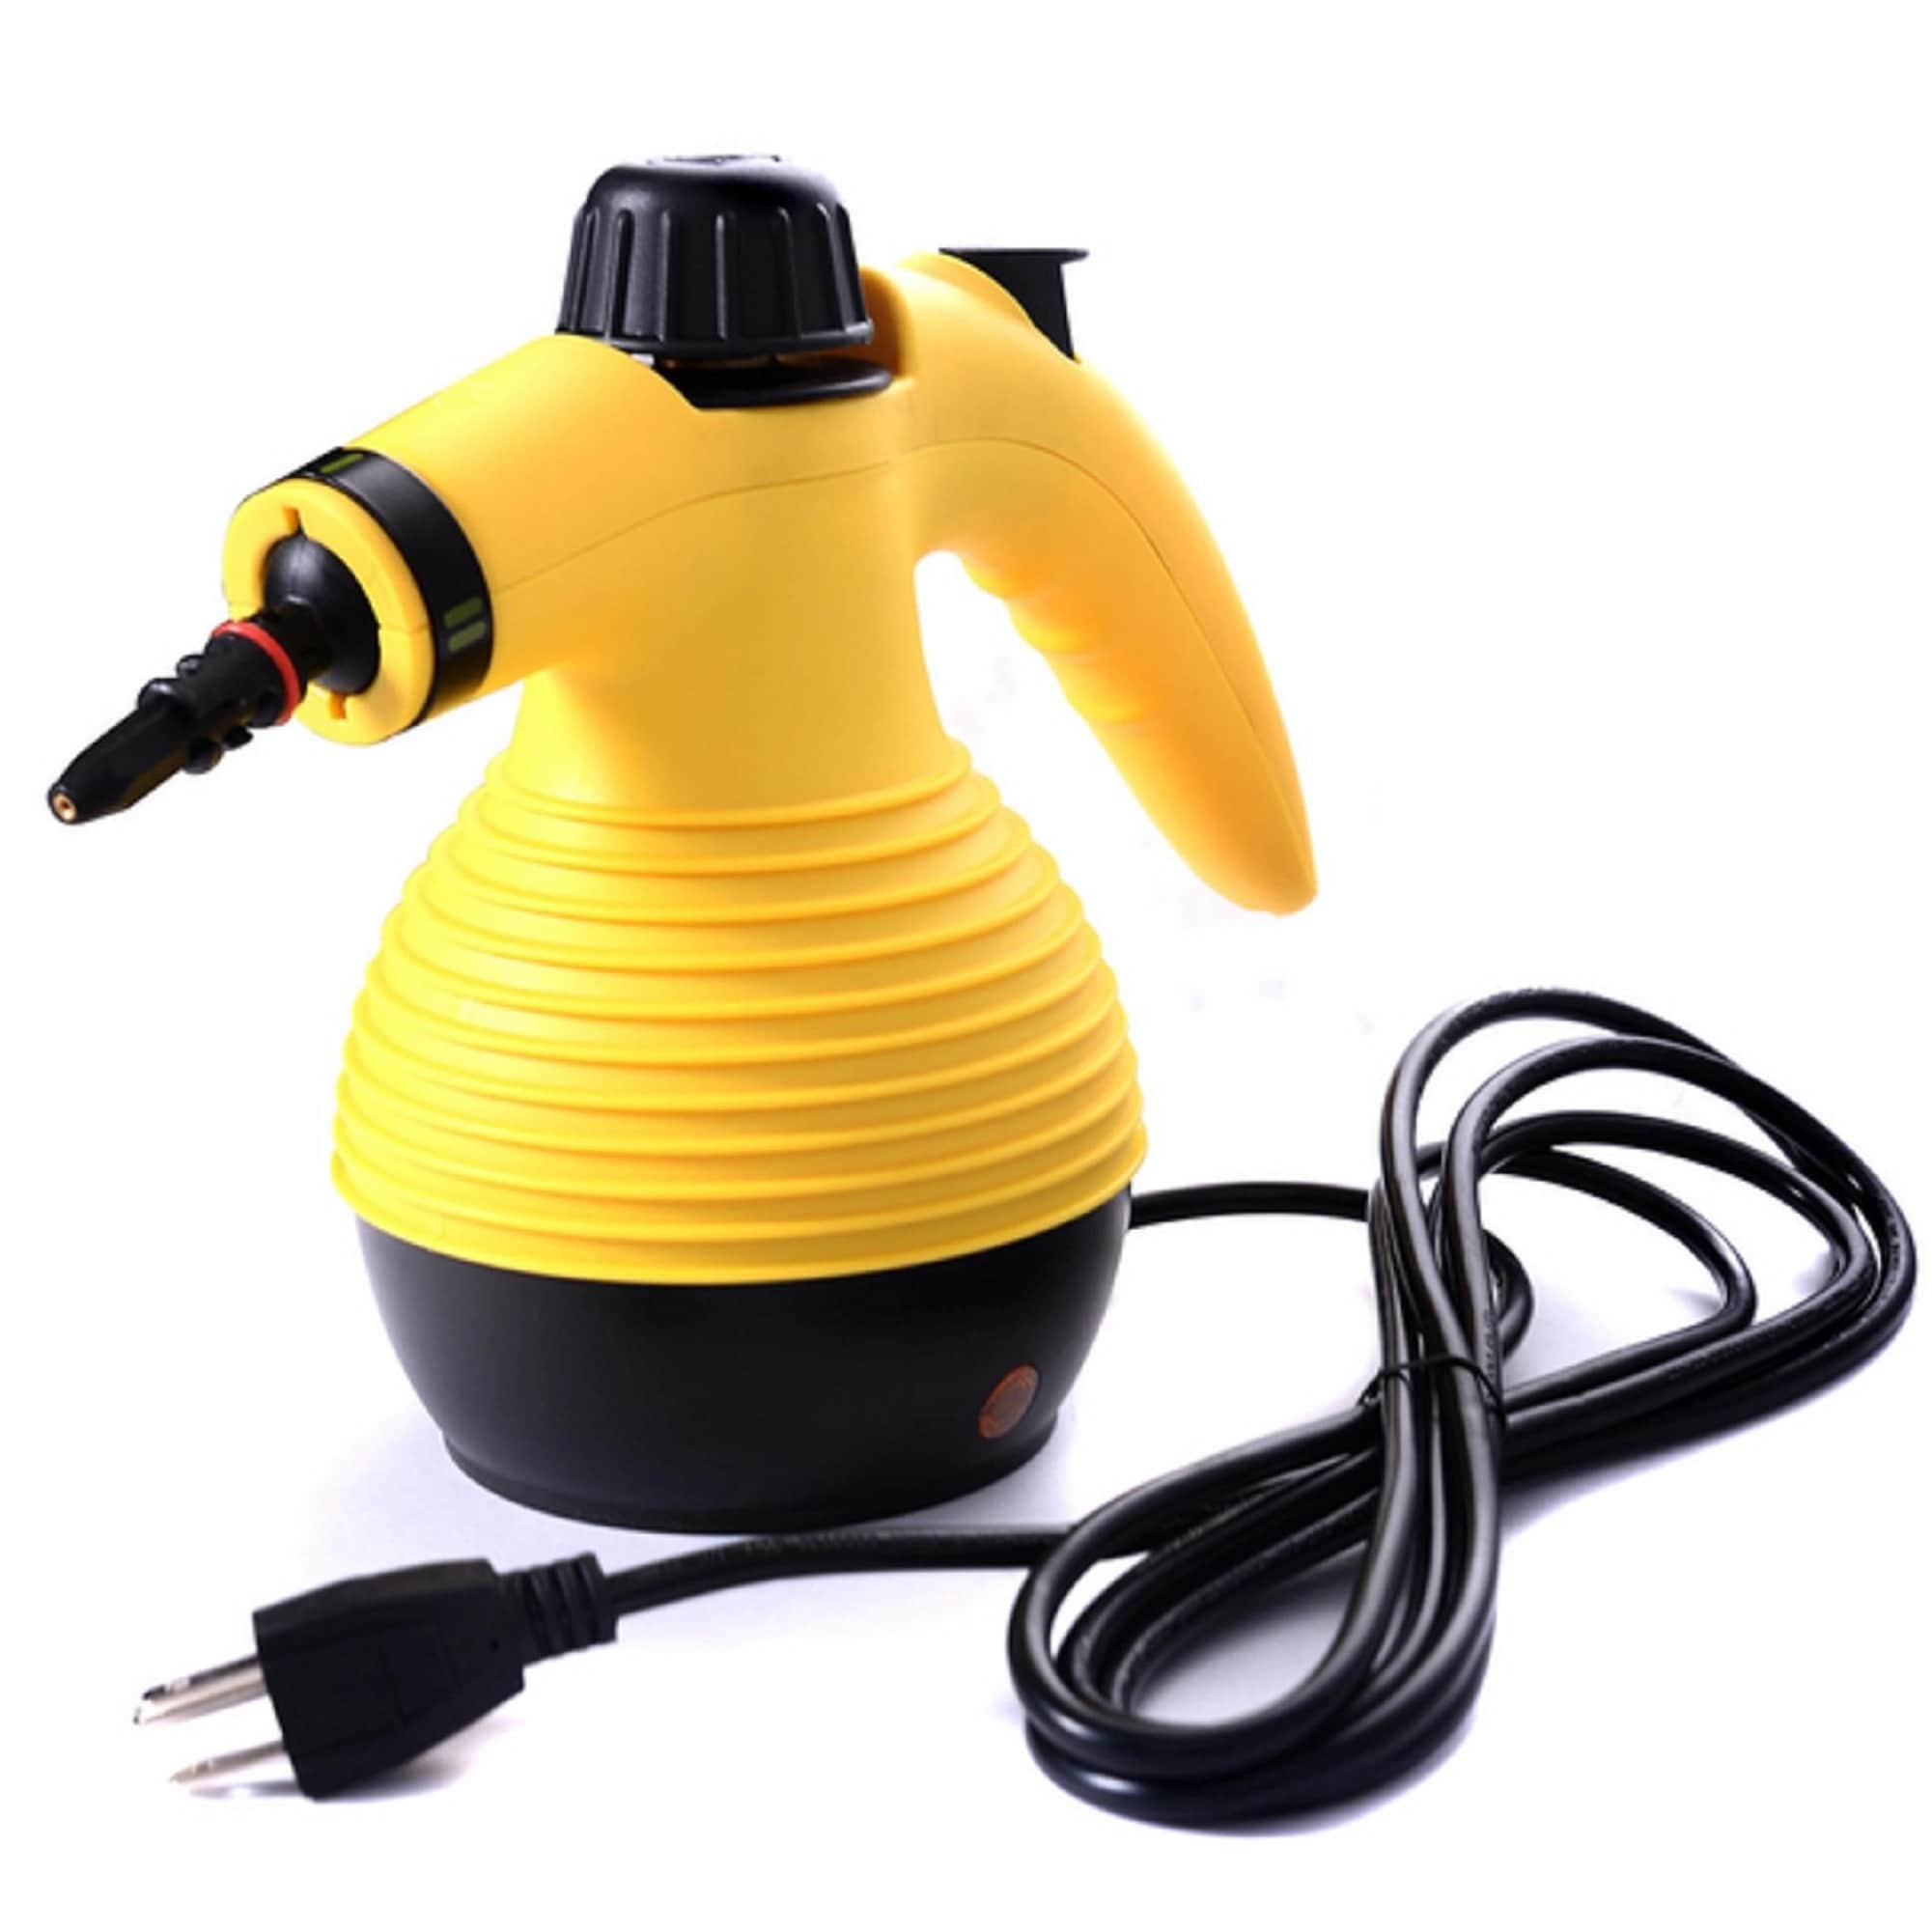 Costway 1400W Multipurpose Pressurized Steam Cleaner Mop w/ 17 Pieces Accessories Yellow